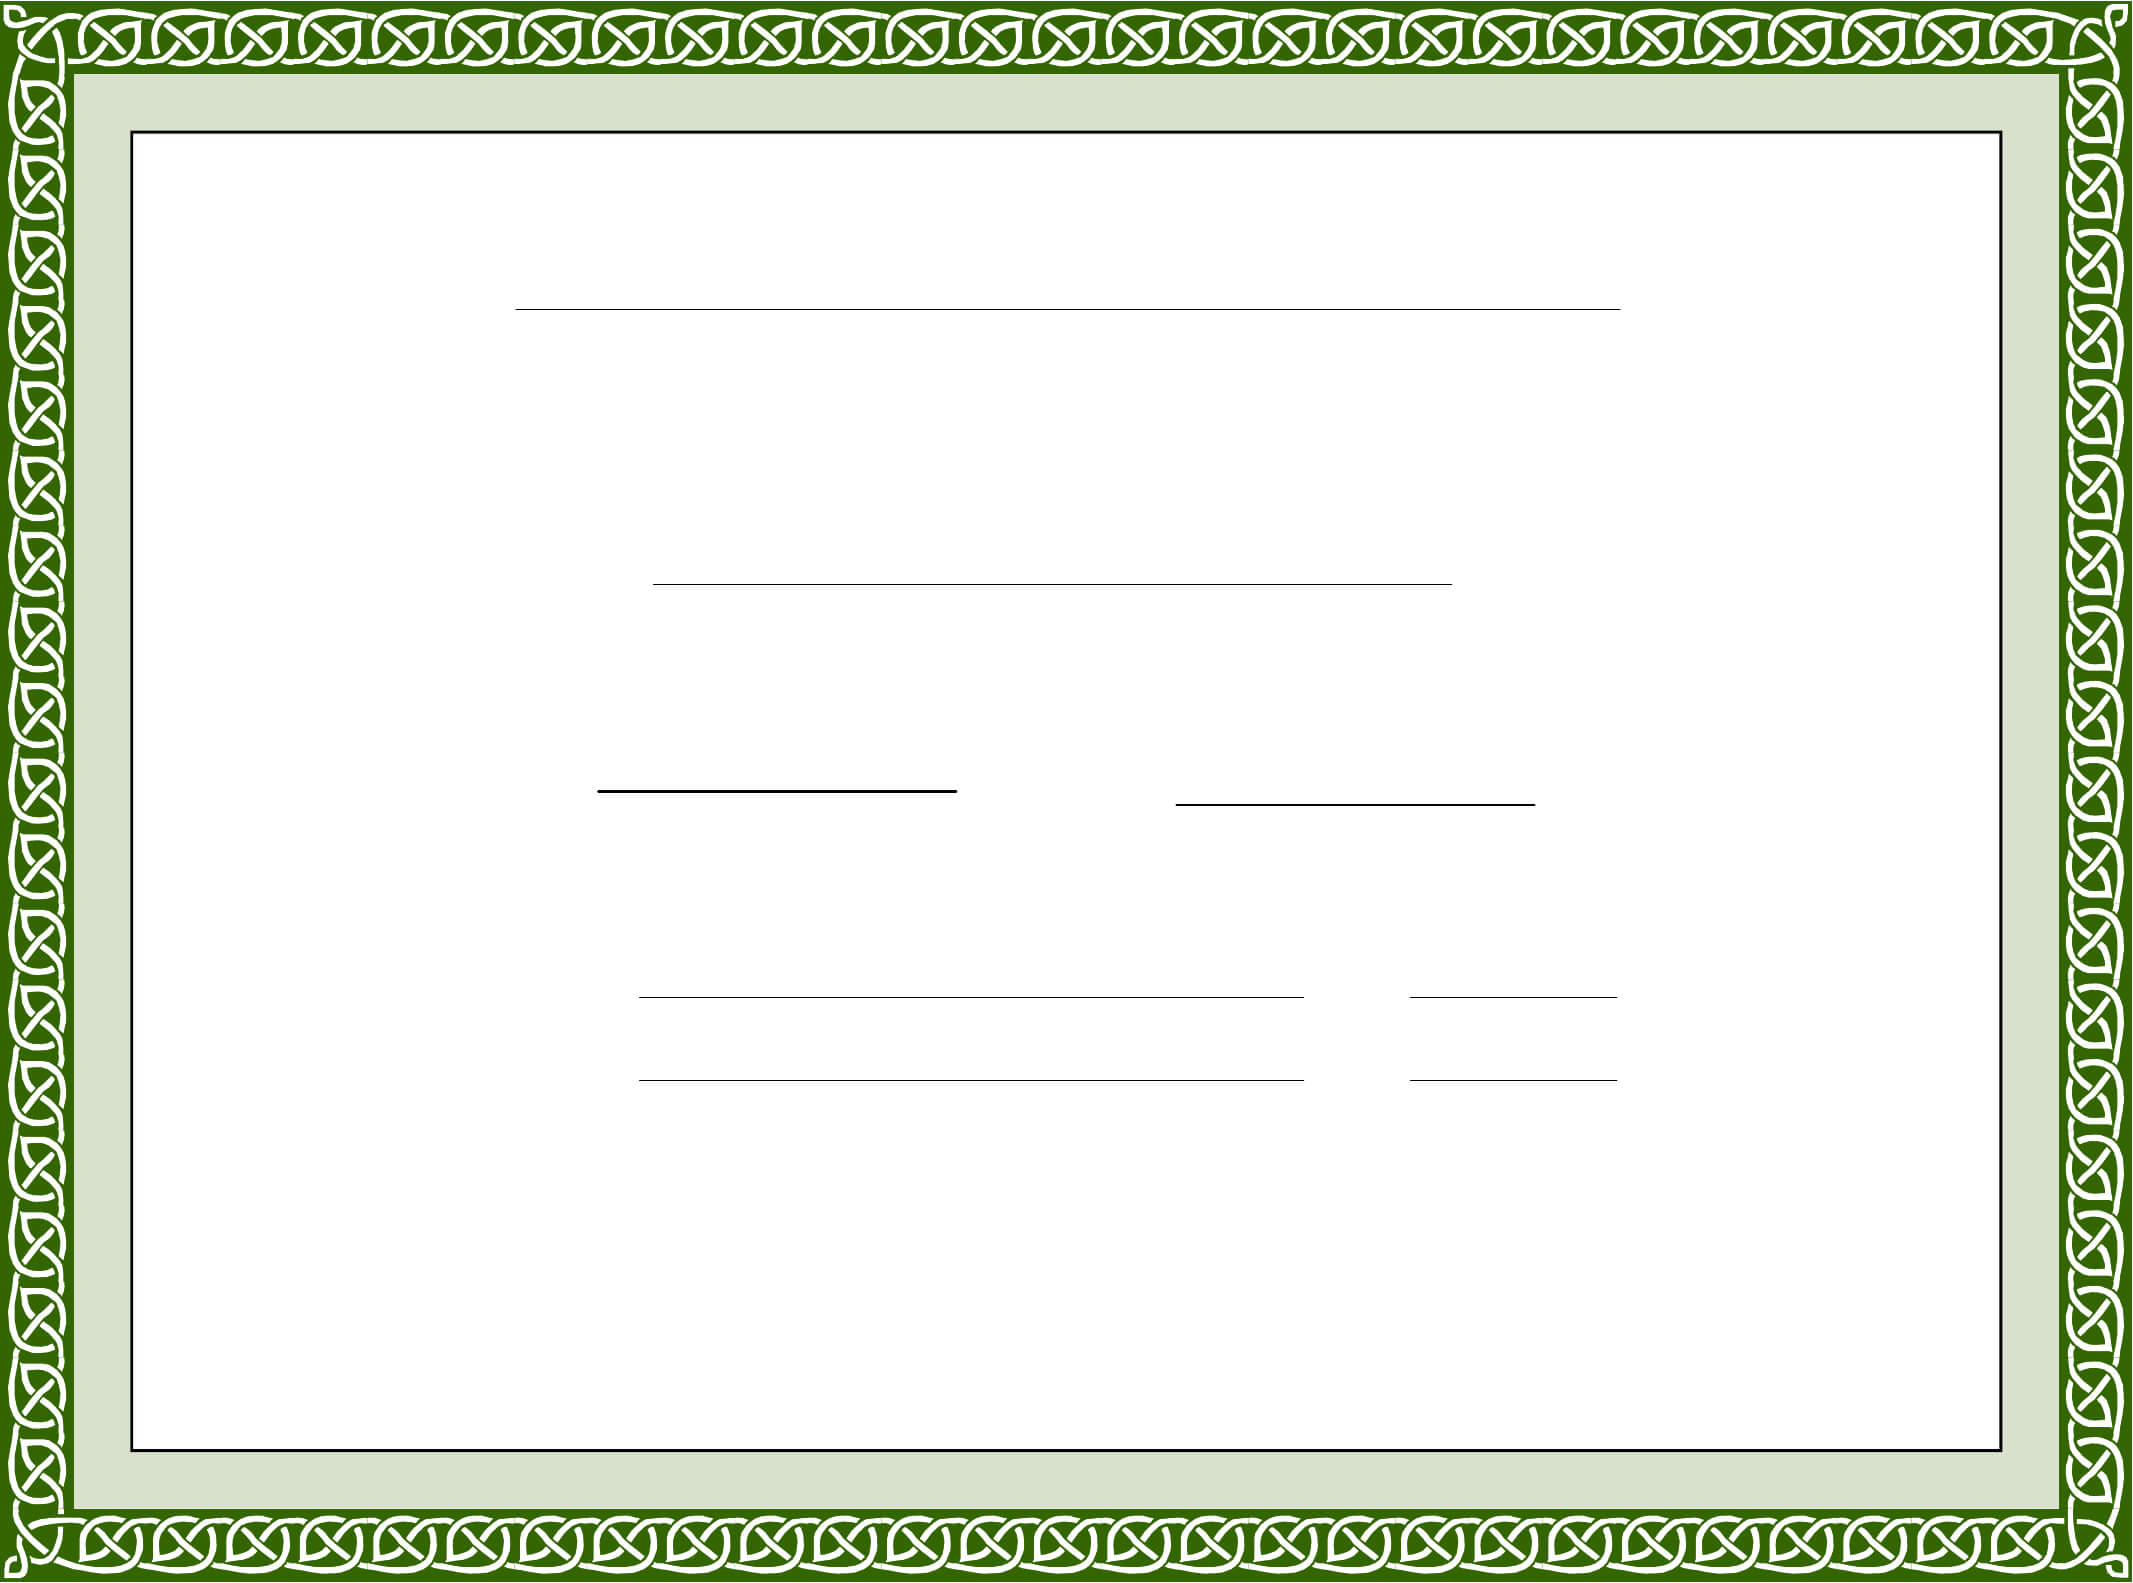 Sample Training Completion Certificate Template Free Download With Regard To Blank Certificate Templates Free Download